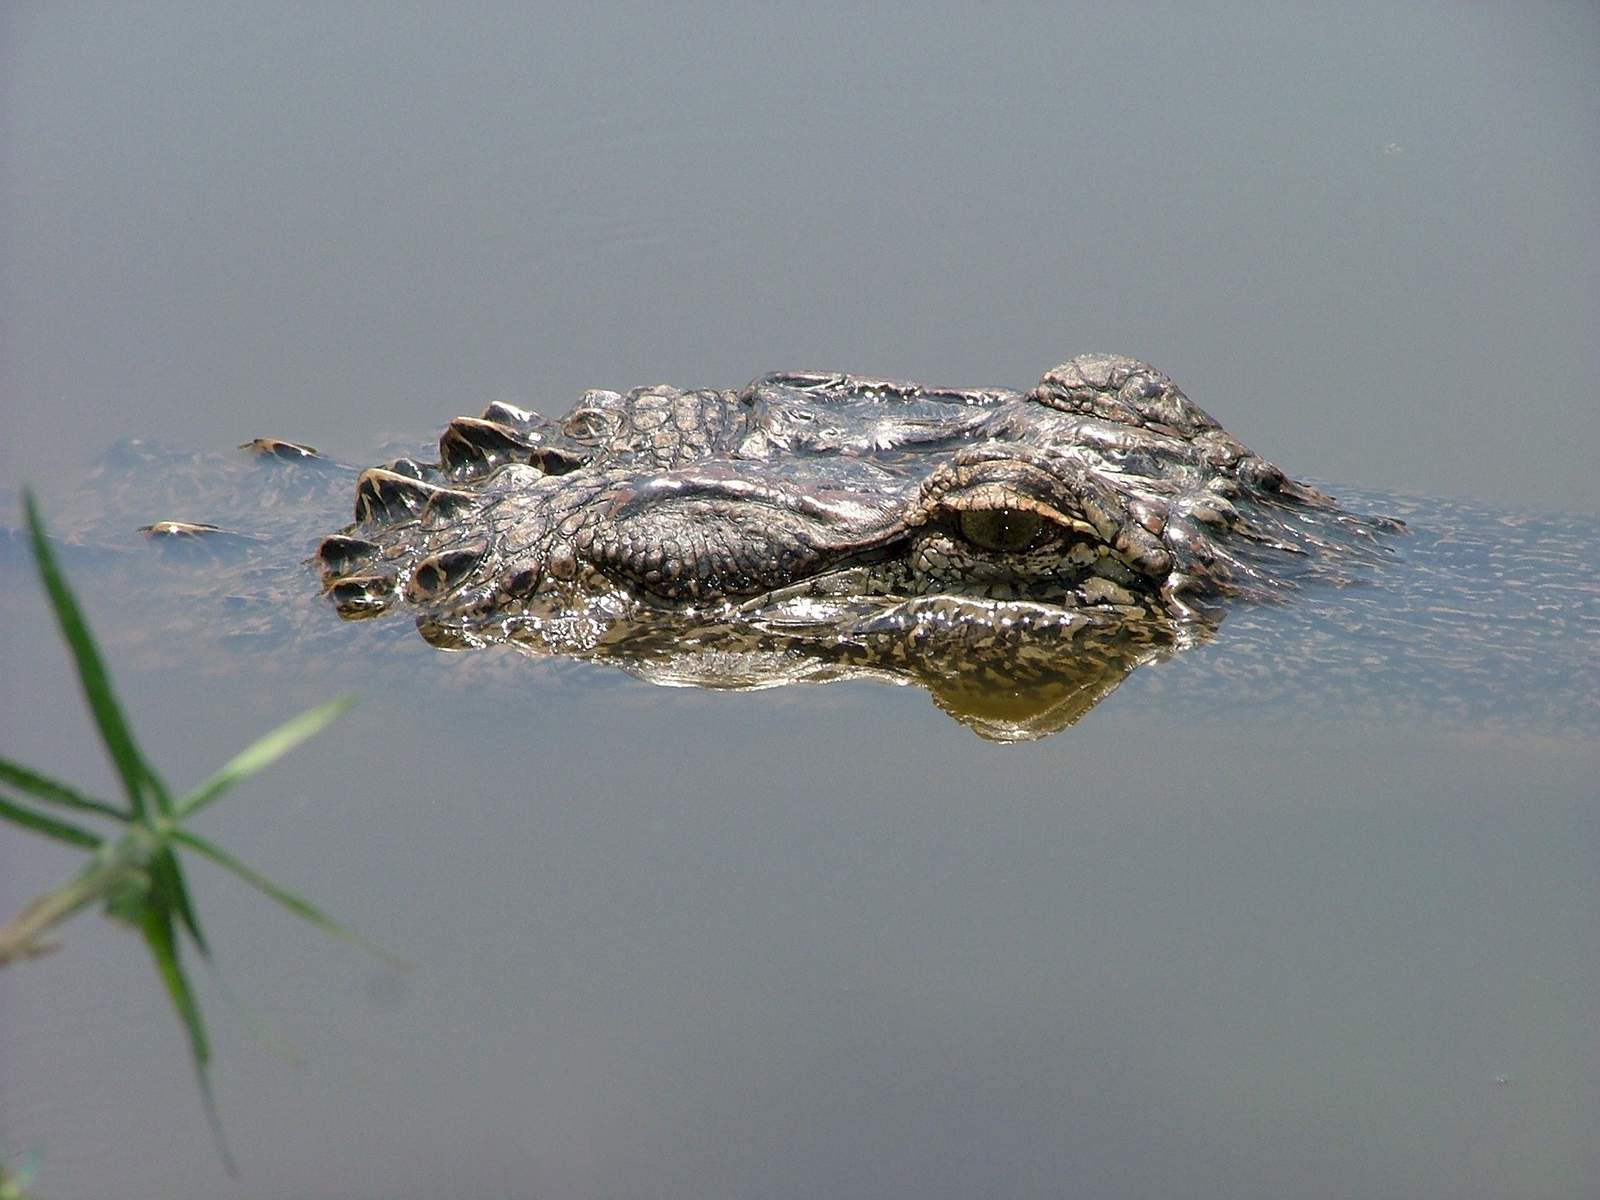 Texas alligator relocated after people fed and threw things at the animal, officials say